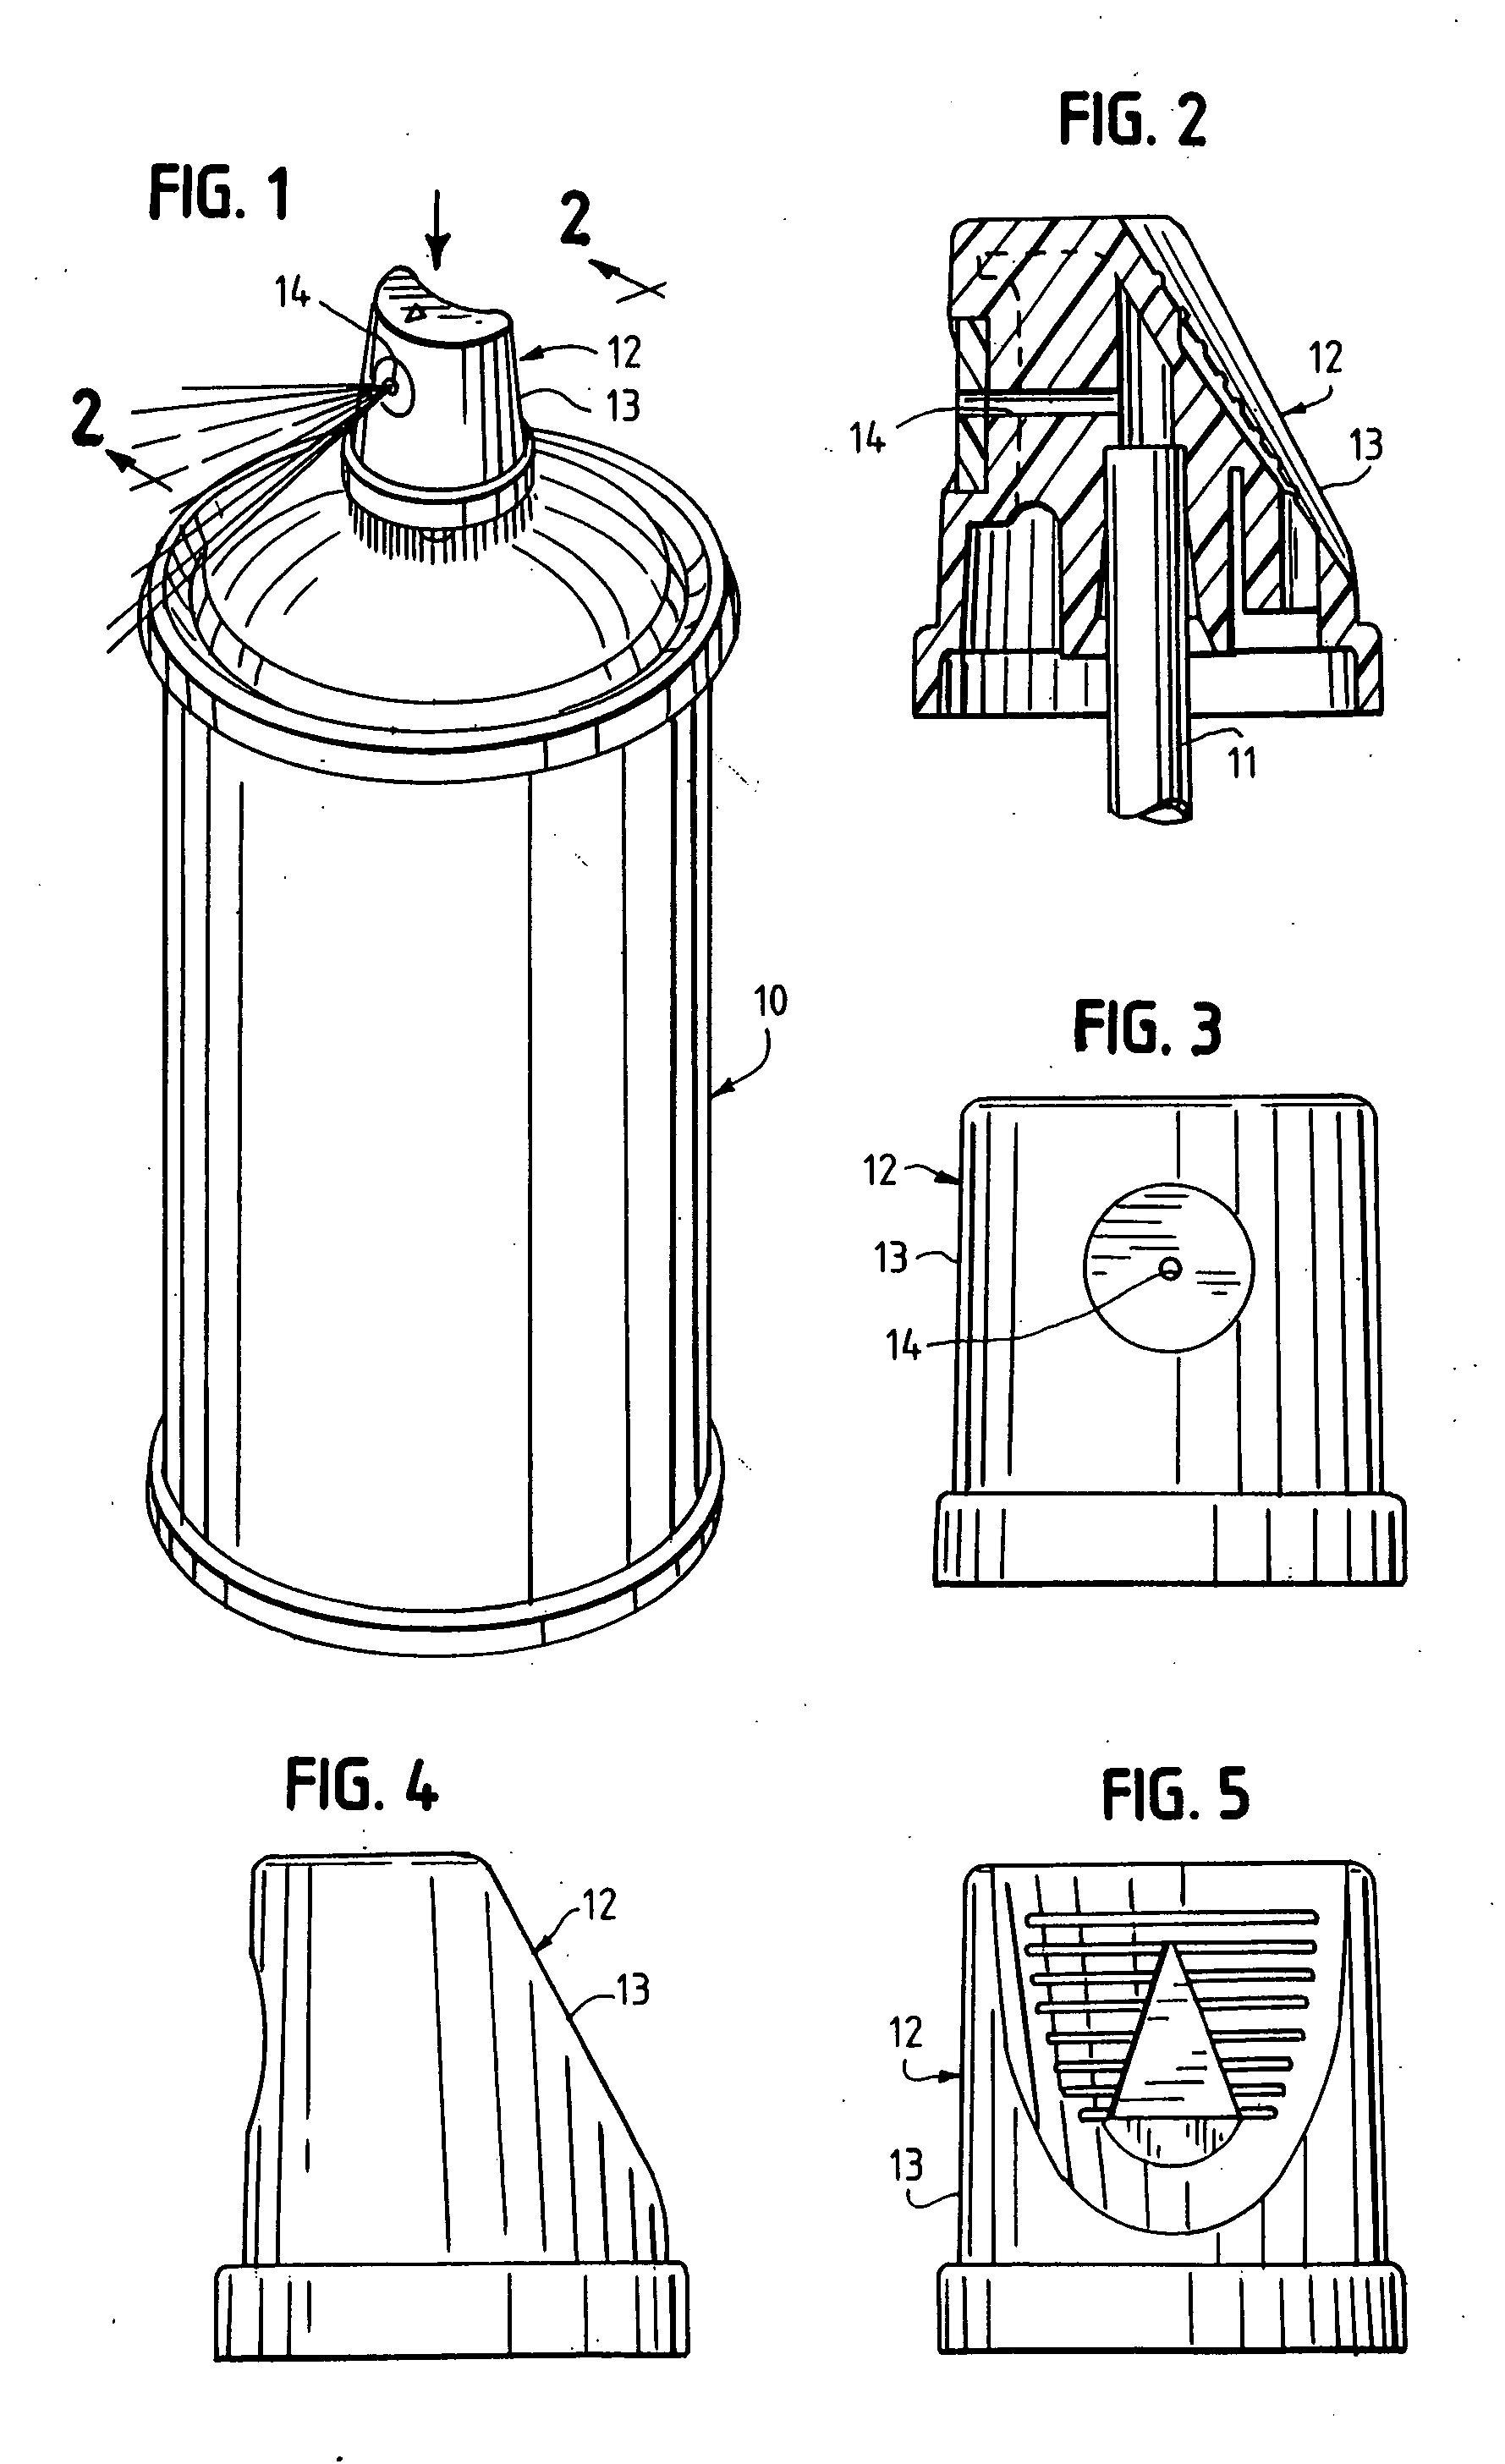 Aerosol compositions, devices and methods